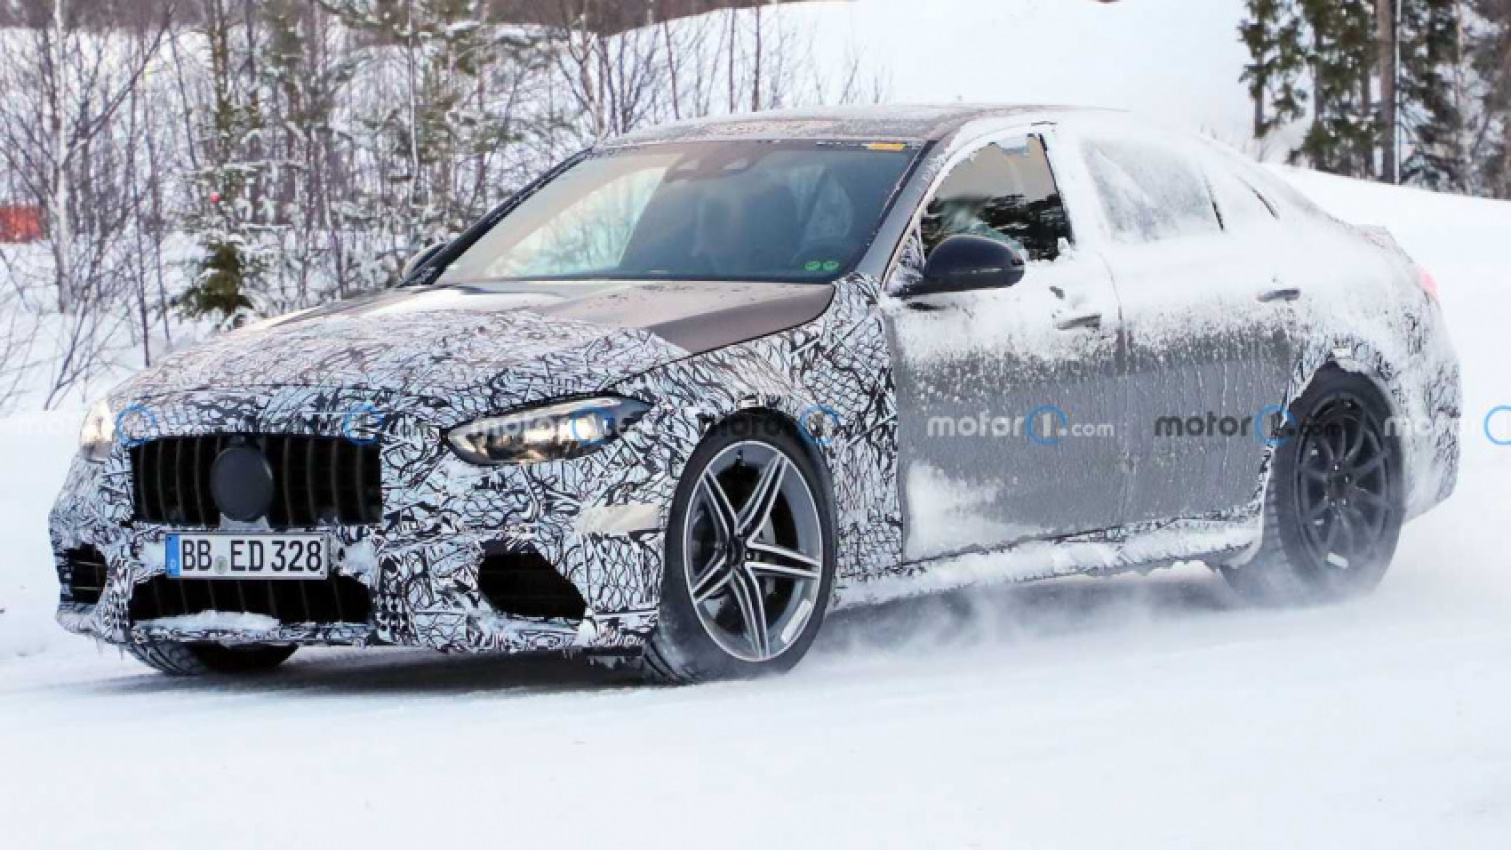 autos, cars, mercedes-benz, mg, mercedes, mercedes-amg c63 sedan and wagon spied with less camo